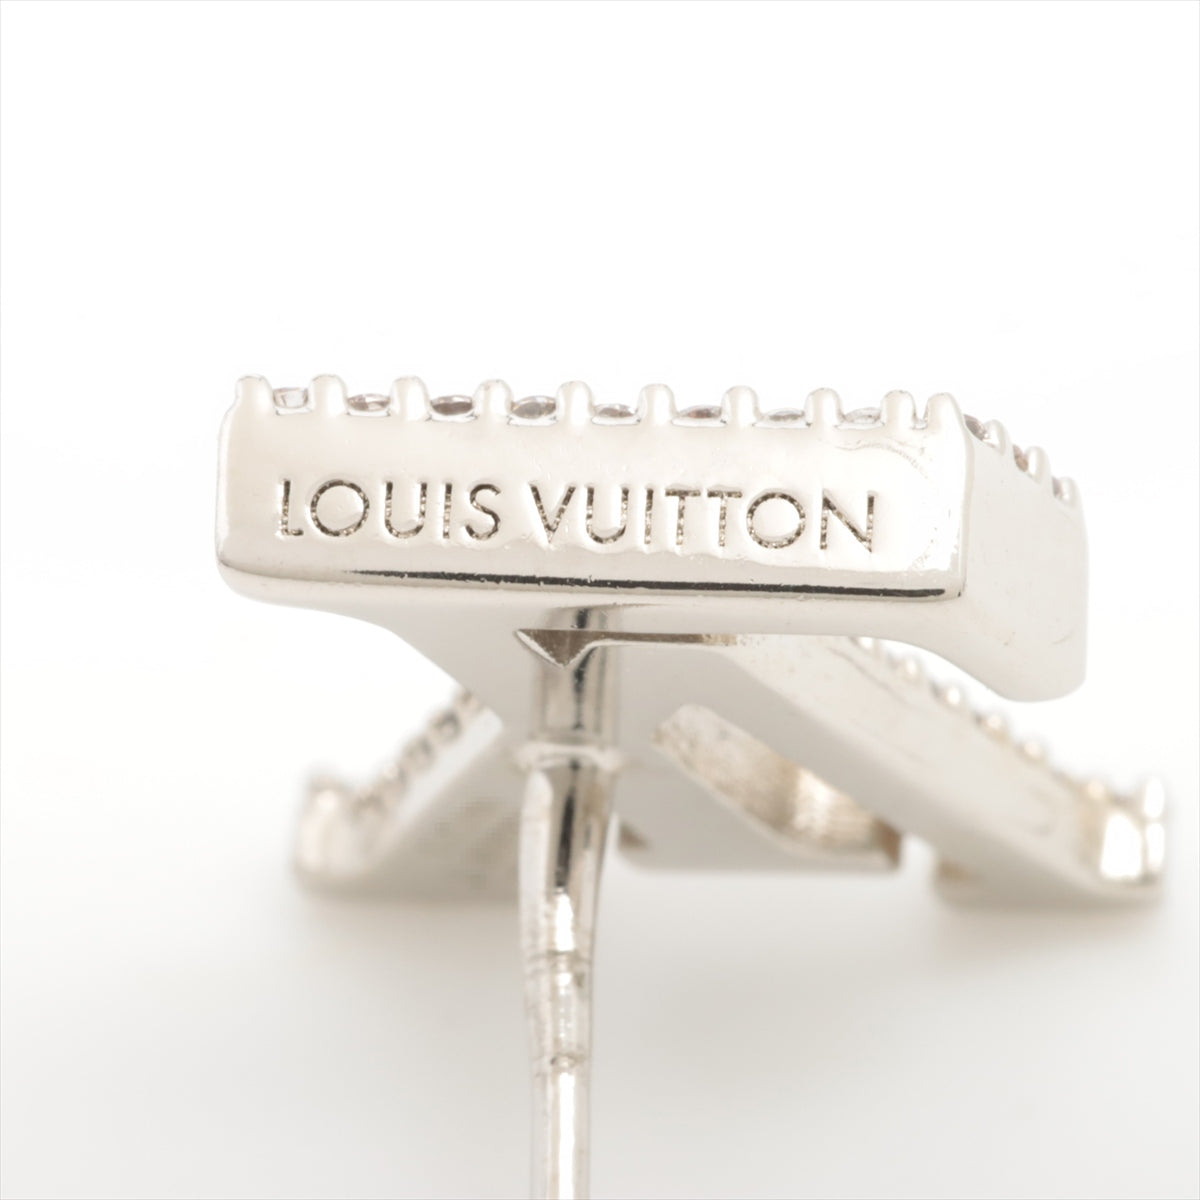 Louis Vuitton M00608 BOOKLE Dreil LV Iconic Strass VA1213 Piercing jewelry (for both ears) GP×inestone Silver